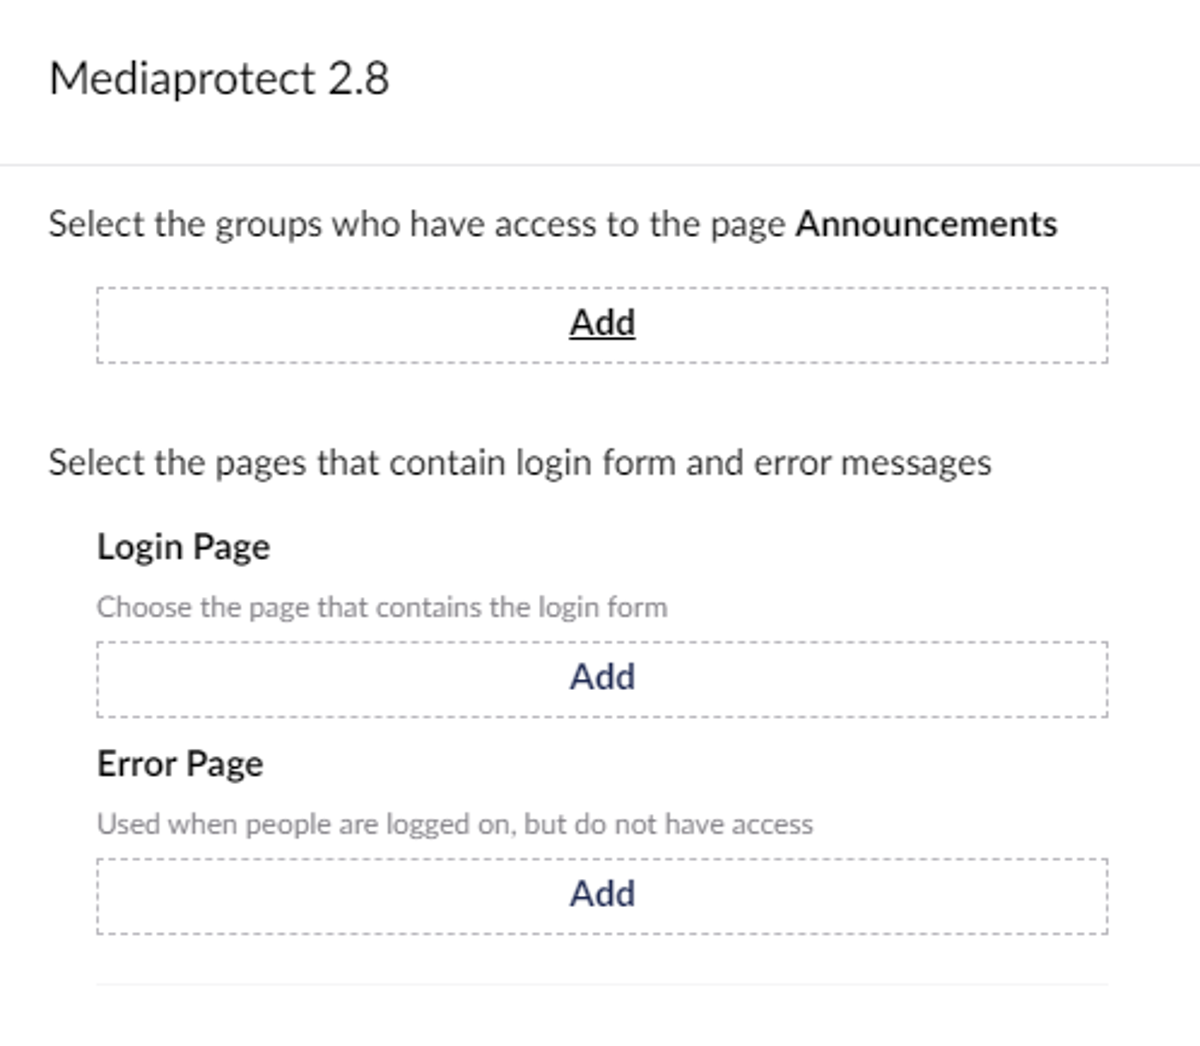 Media Protect redirect pages options